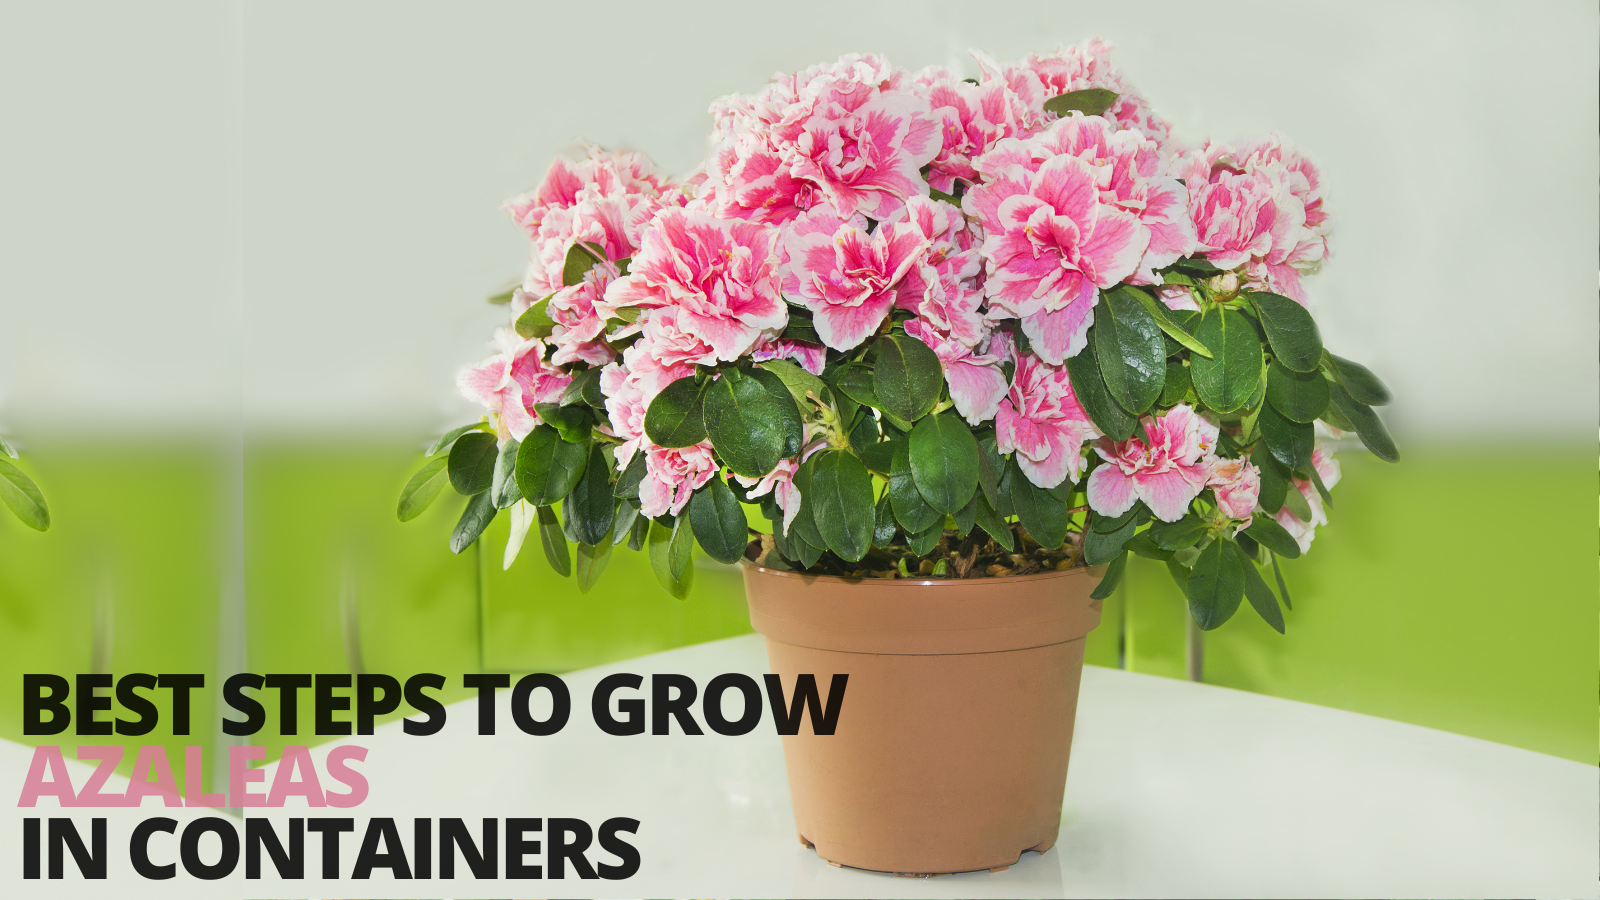 Best Steps To Grow Azaleas In Containers